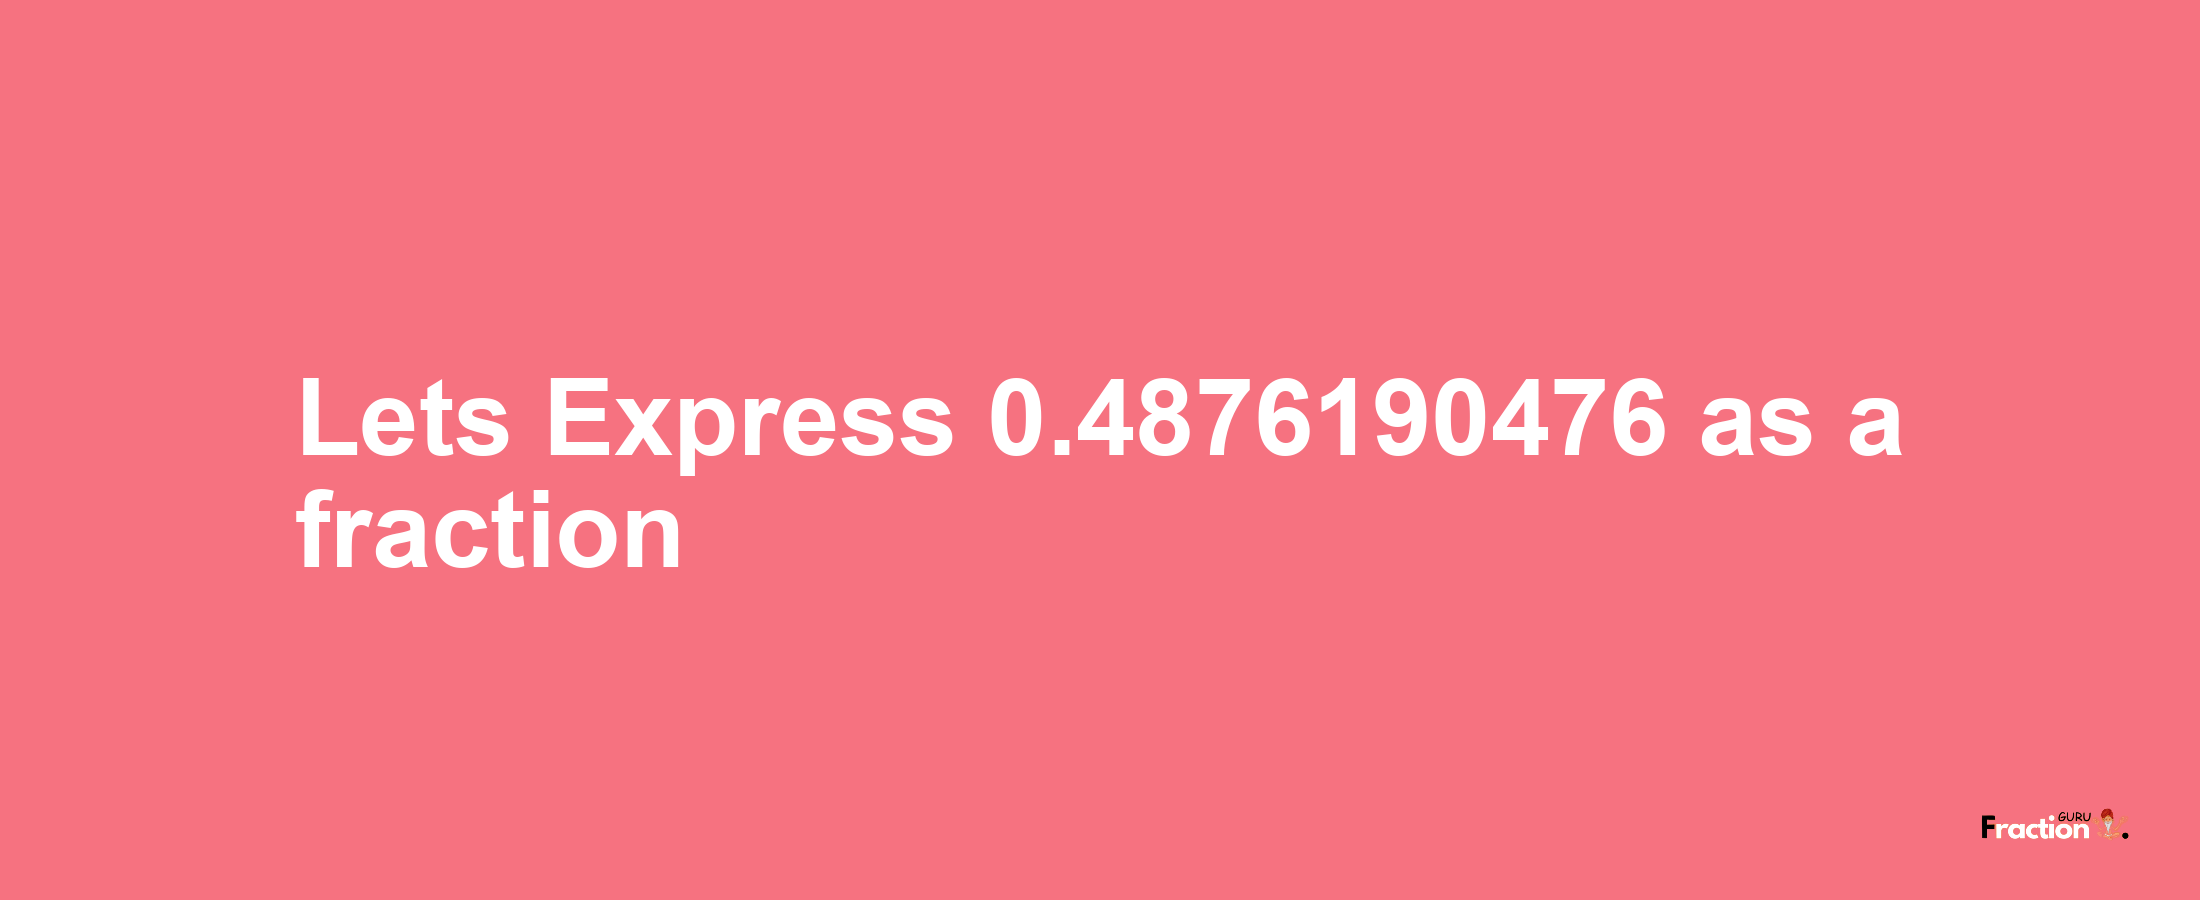 Lets Express 0.4876190476 as afraction